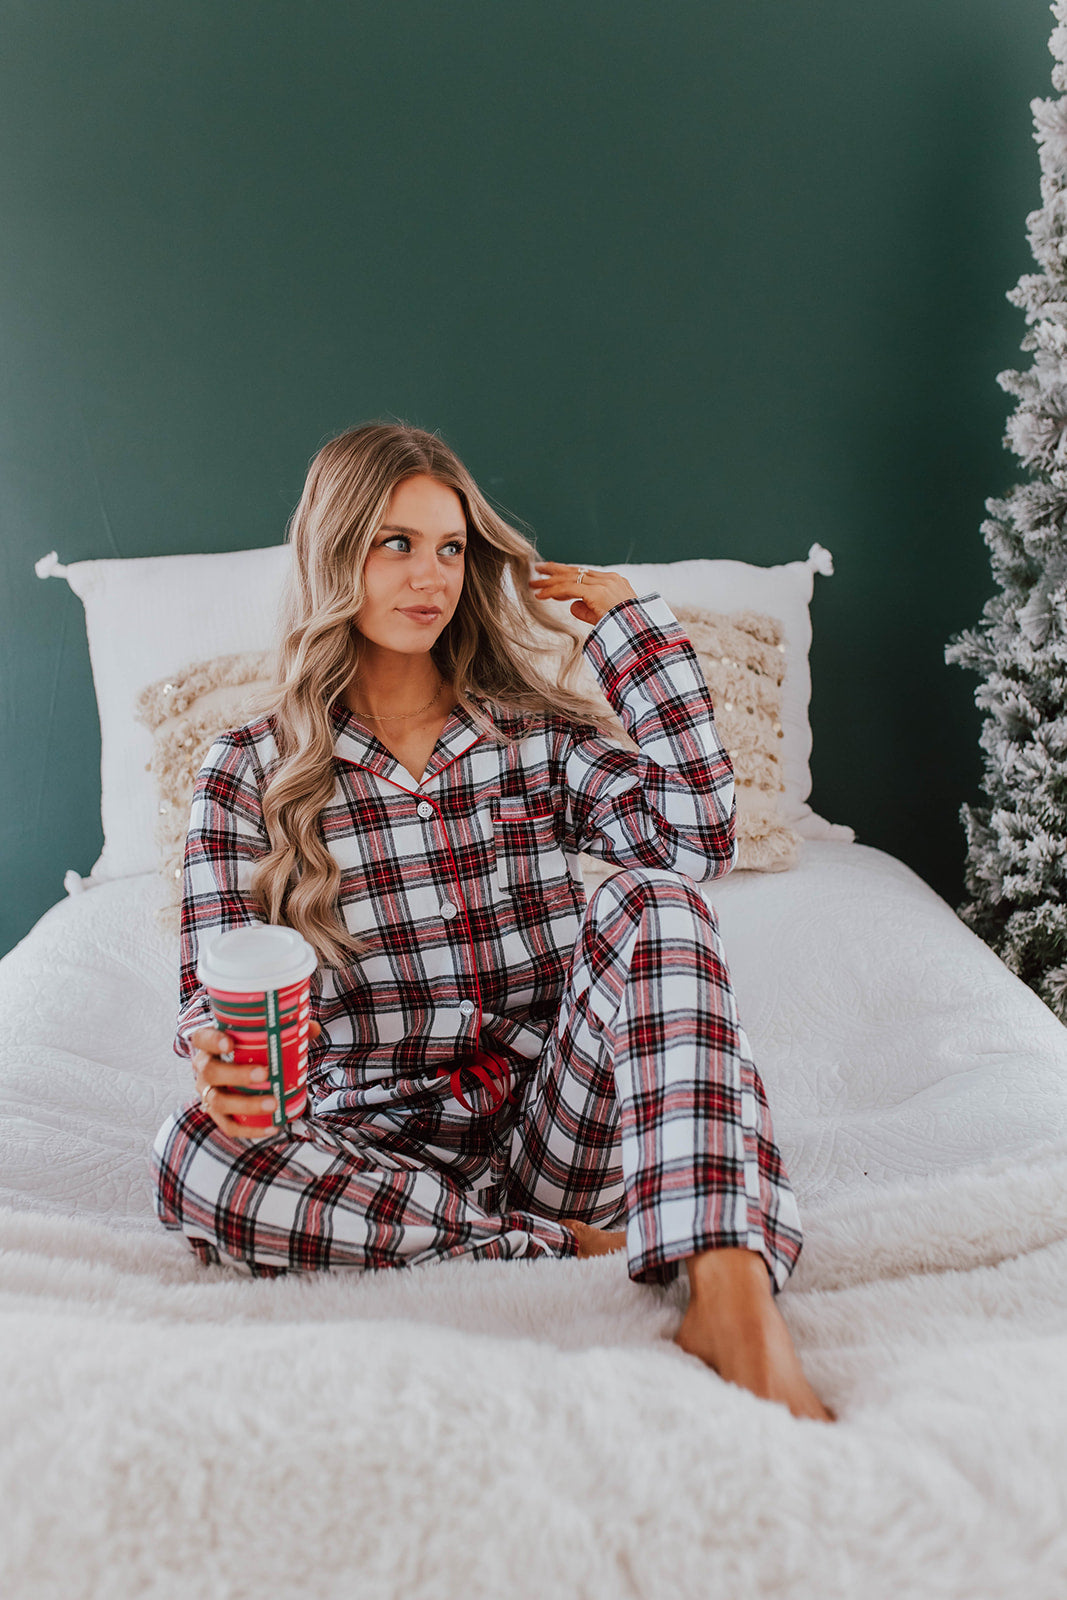 THE FIRESIDE Desert PAJAMAS Pink RED FLANNEL – IN PLAID